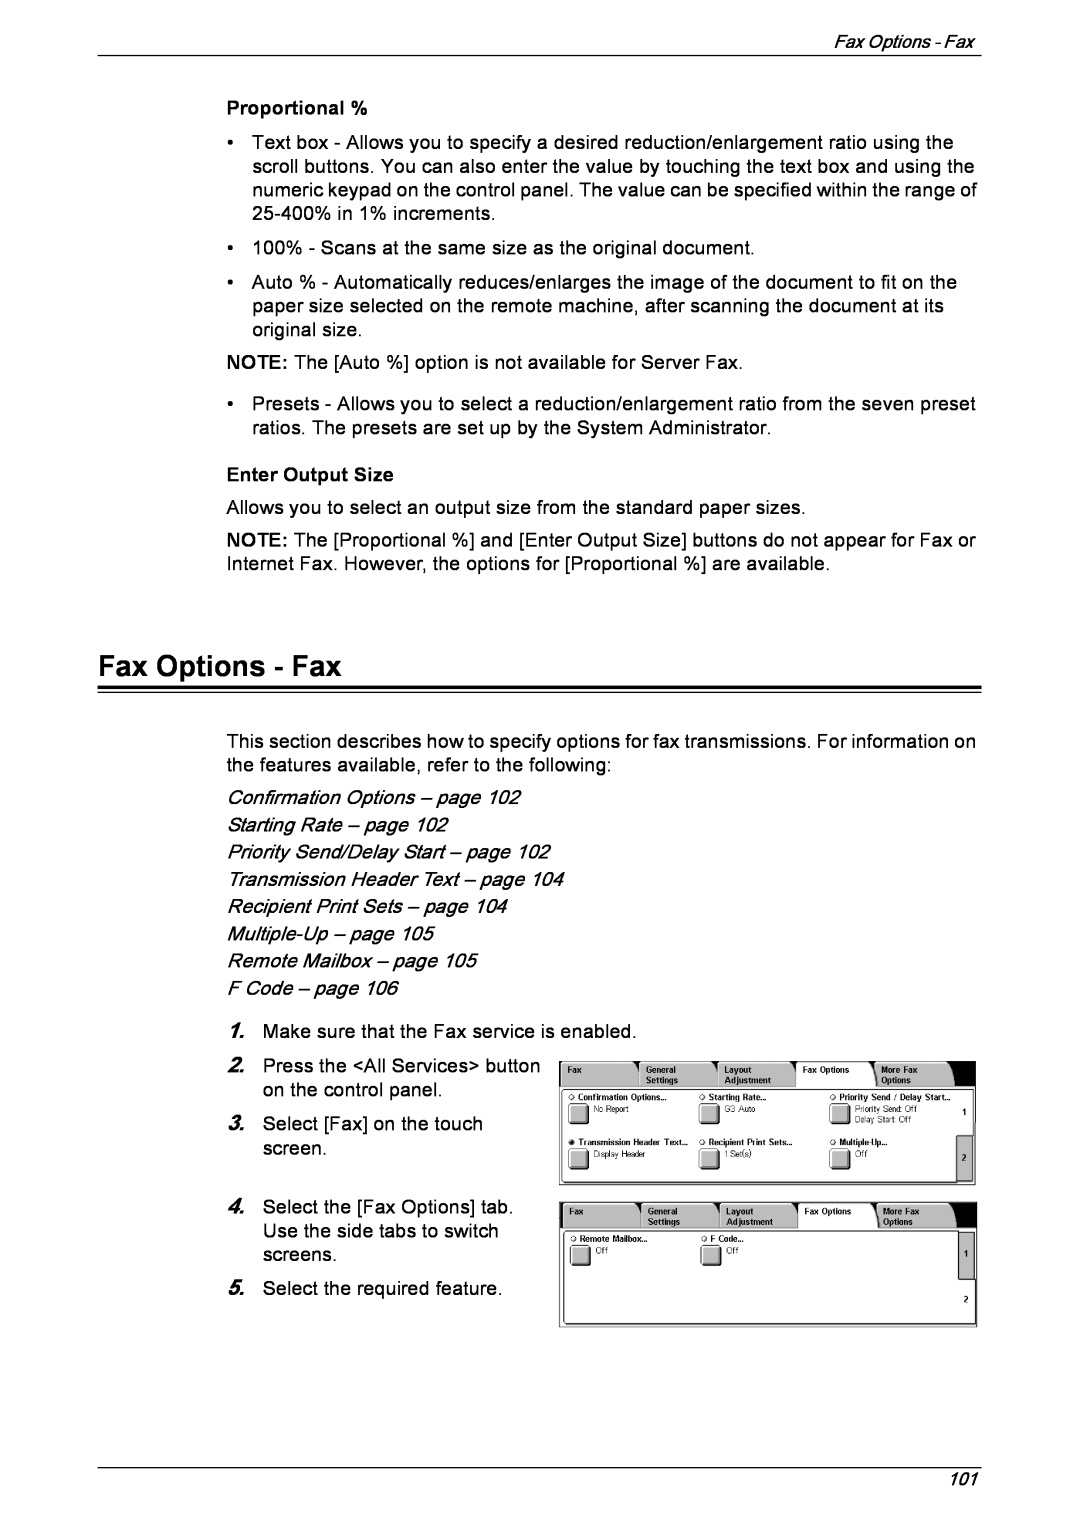 Xerox 5230 manual Fax Options - Fax, Enter Output Size, Confirmation Options – page Starting Rate – page, Proportional % 